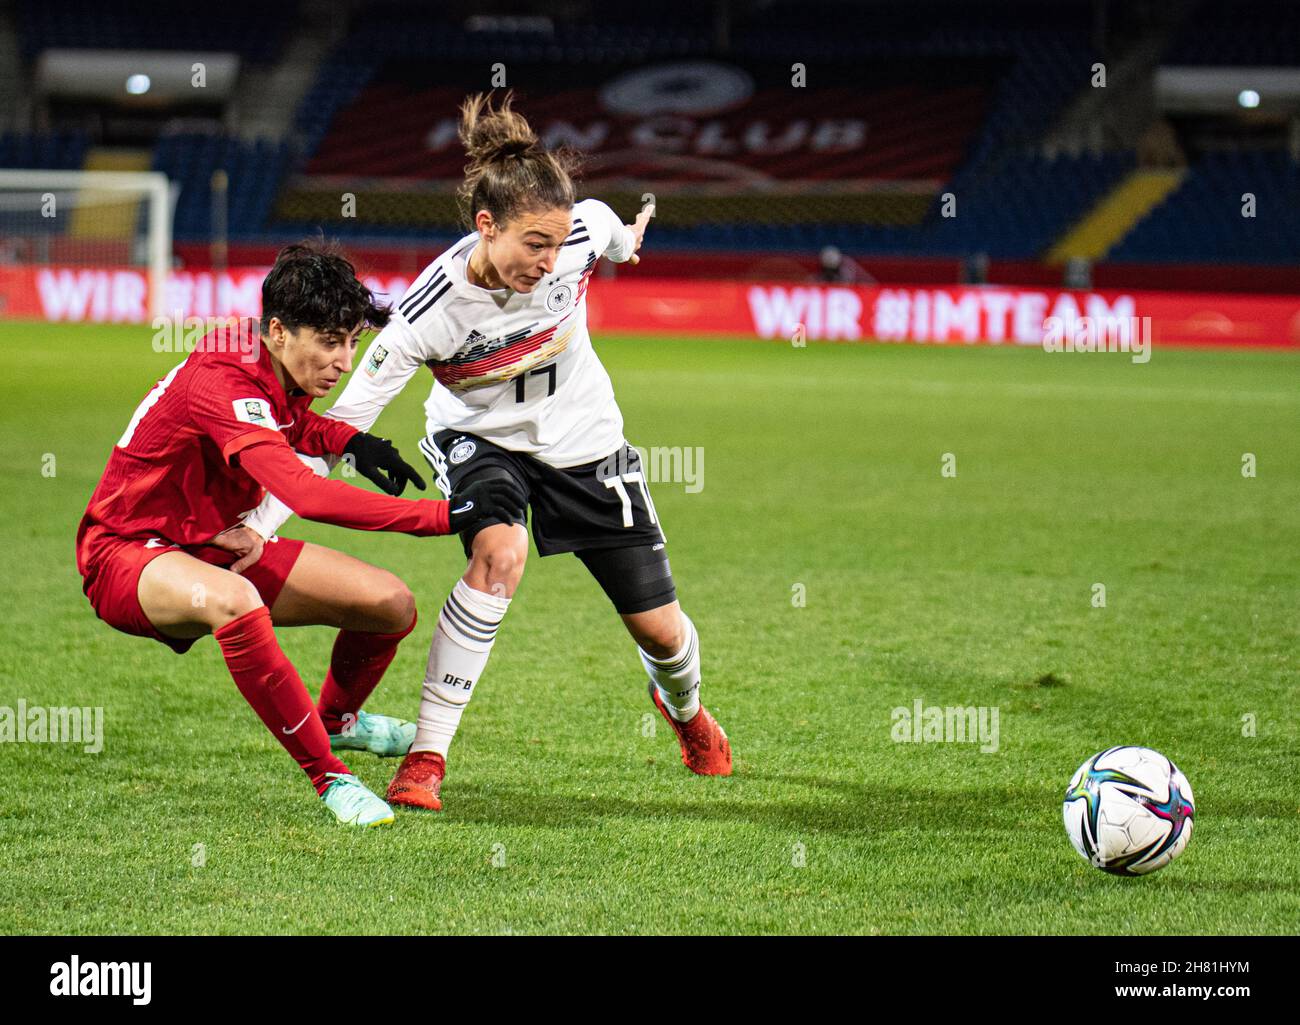 Fc Bayern München 2021 High Resolution Stock Photography and Images - Alamy